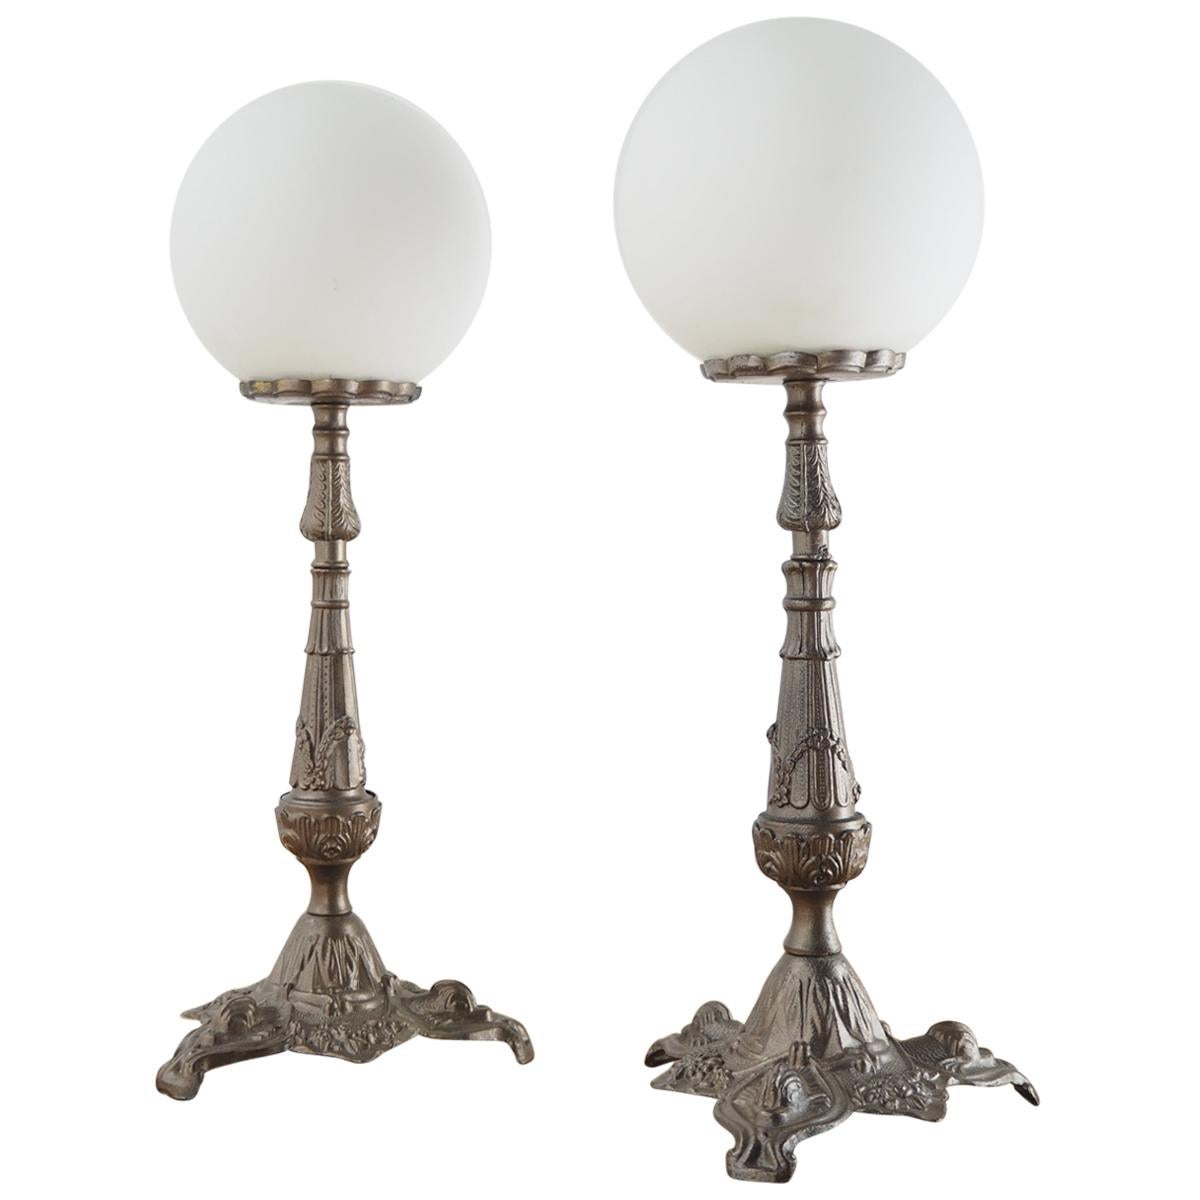 Set of Two Antique Metal Table Lamp